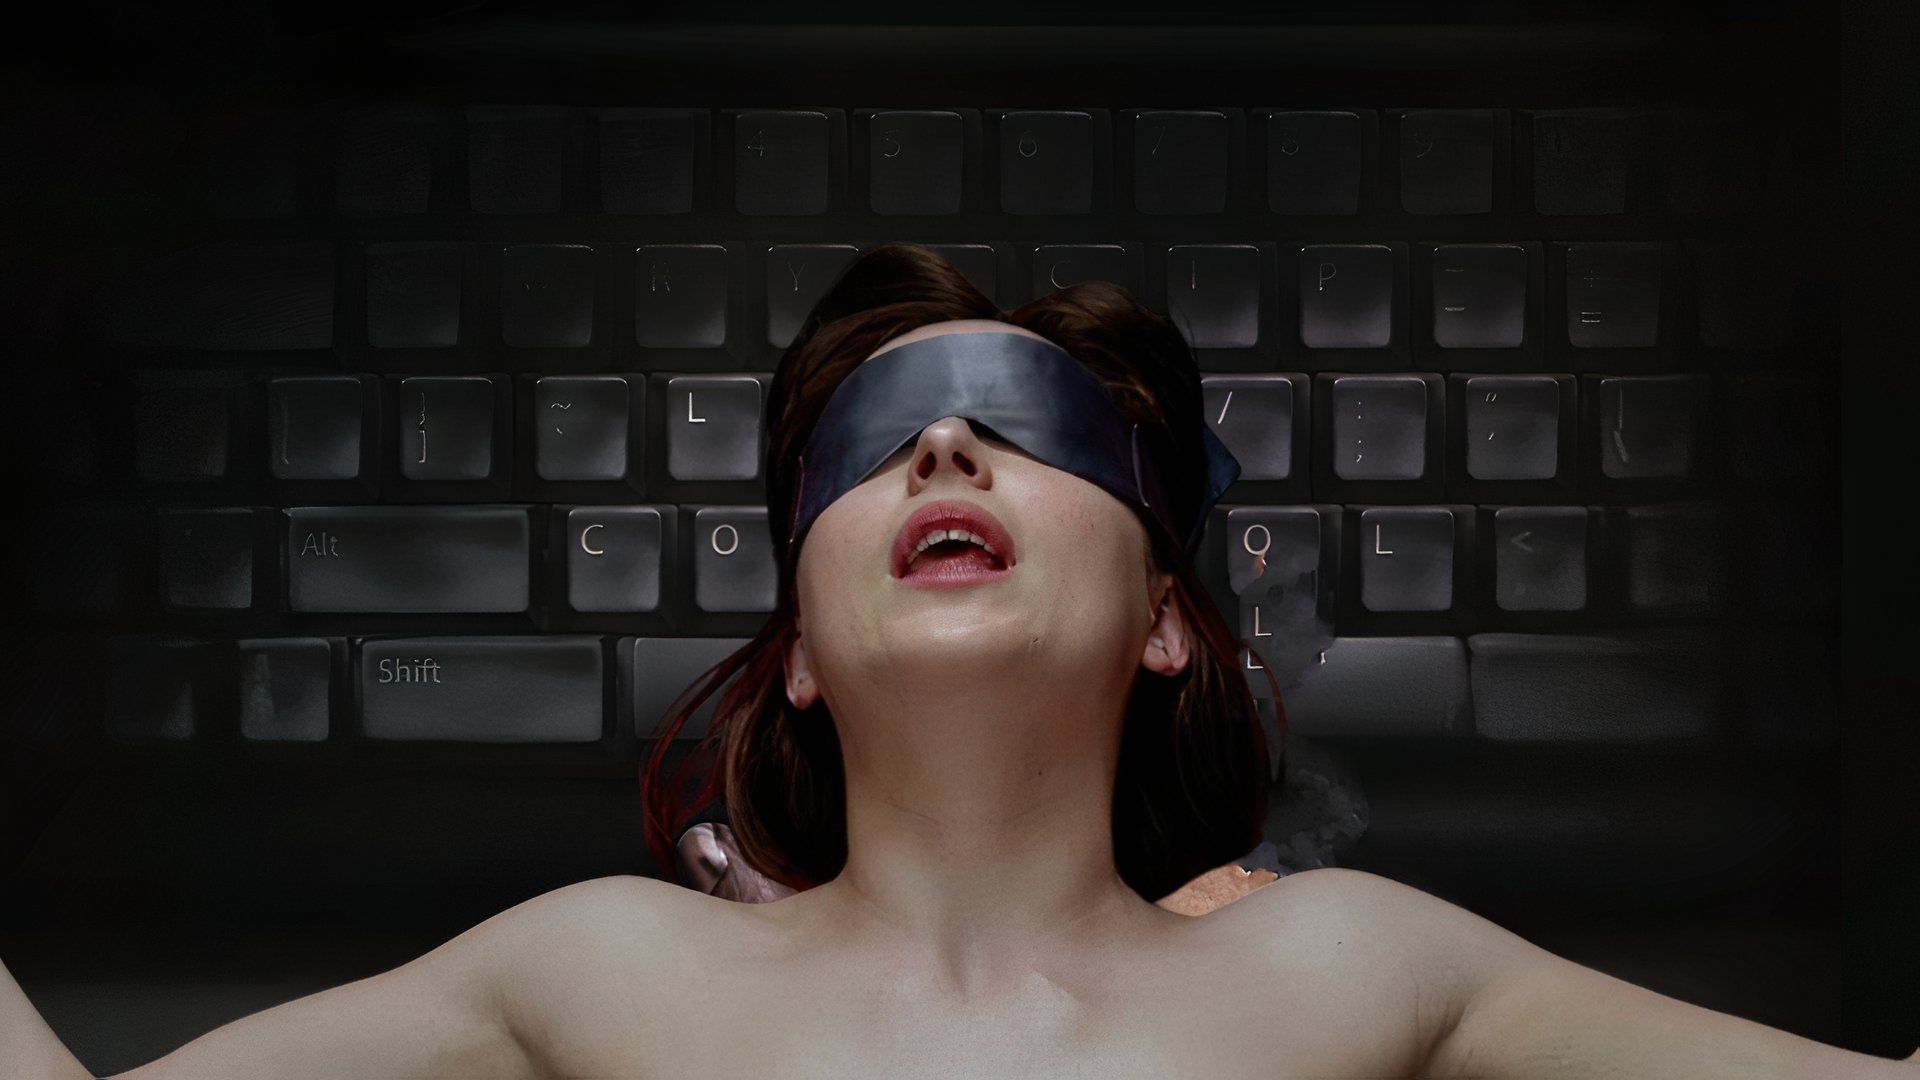 Dakota Johnson naked and blindfolded in Fifty Shades of Grey overlayed on the keyboard from Tell Them You Love Me on Netflix